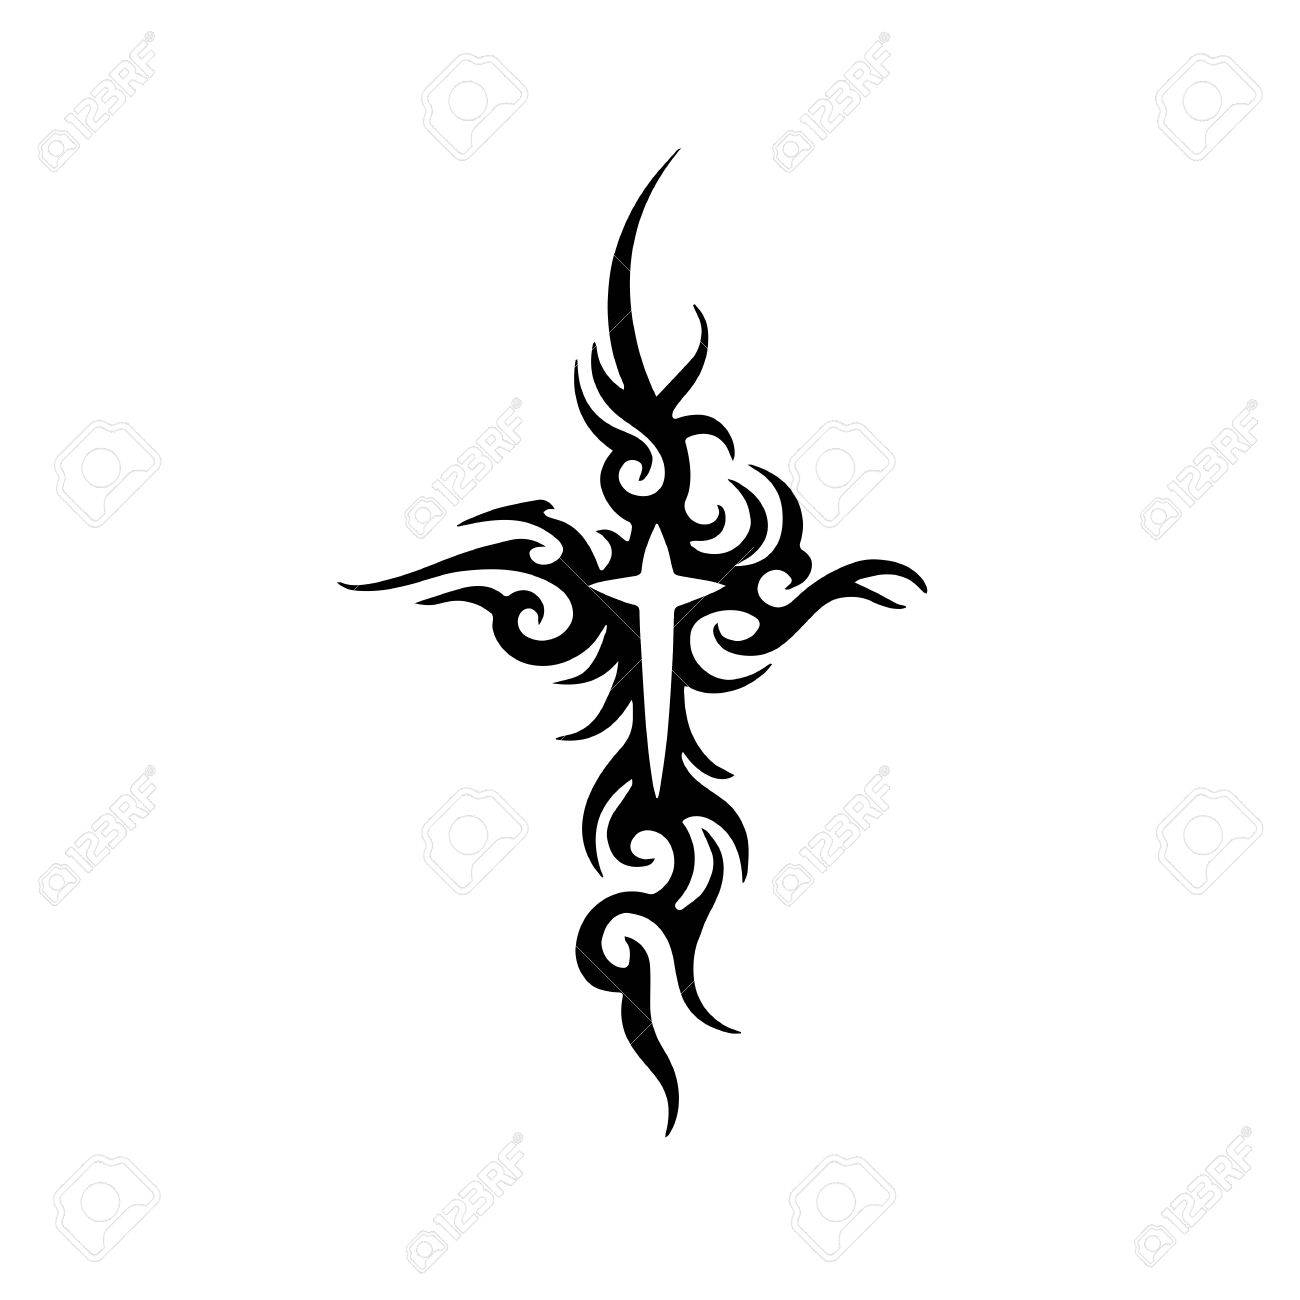 Tribal Cross Tattoo Design Royalty Free Cliparts Vectors And Stock within dimensions 1300 X 1300